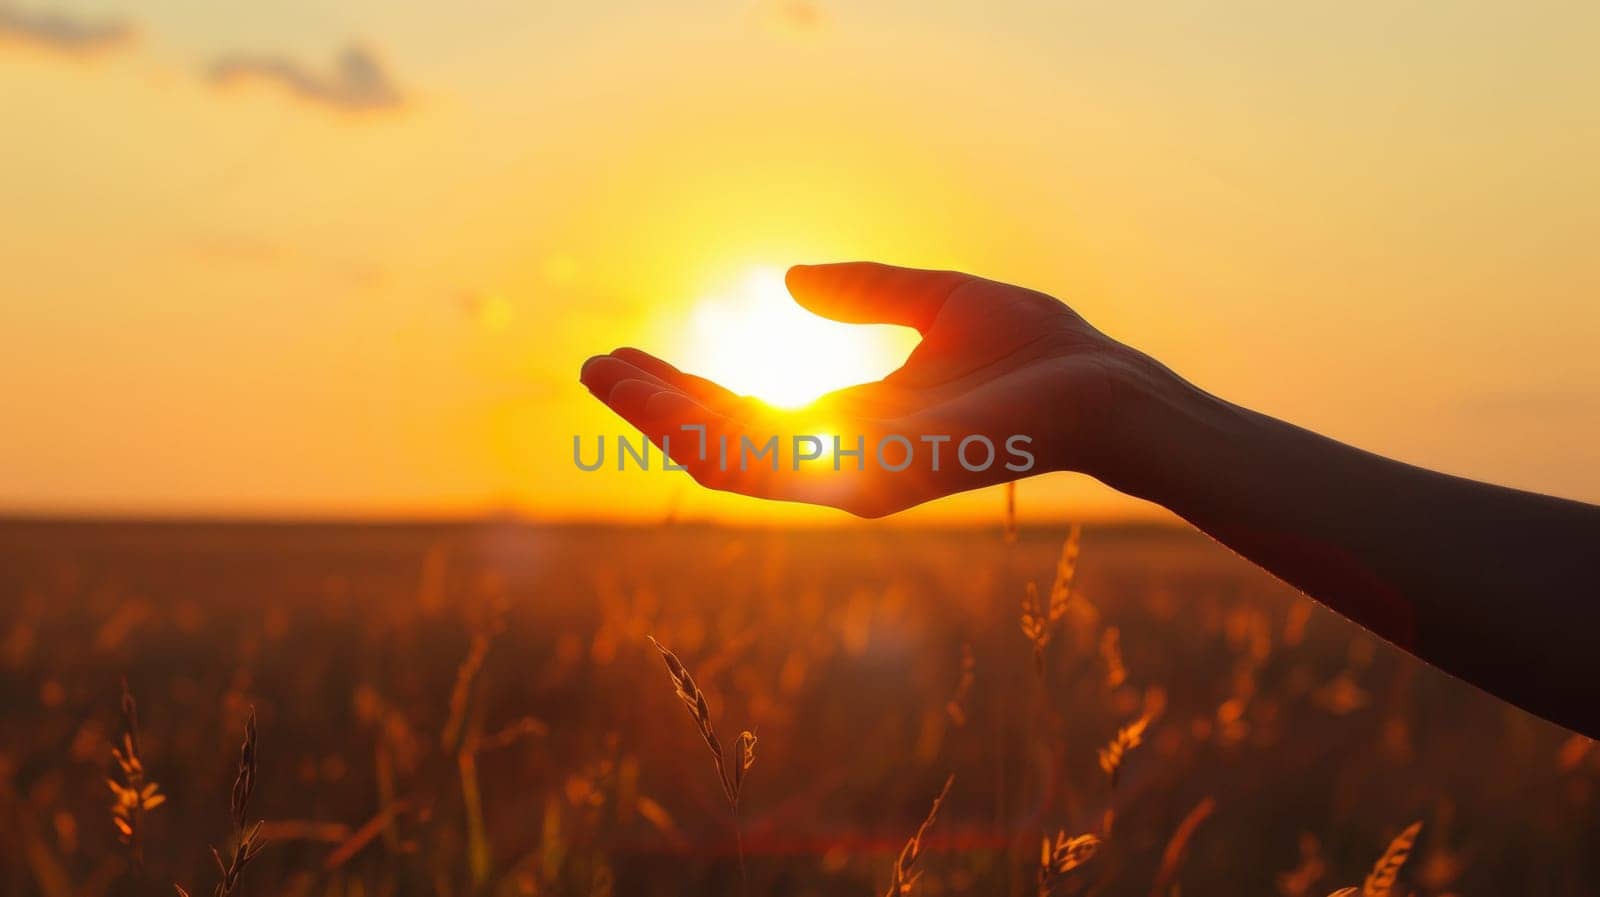 A person holding out their hand in a field with the sun setting, AI by starush